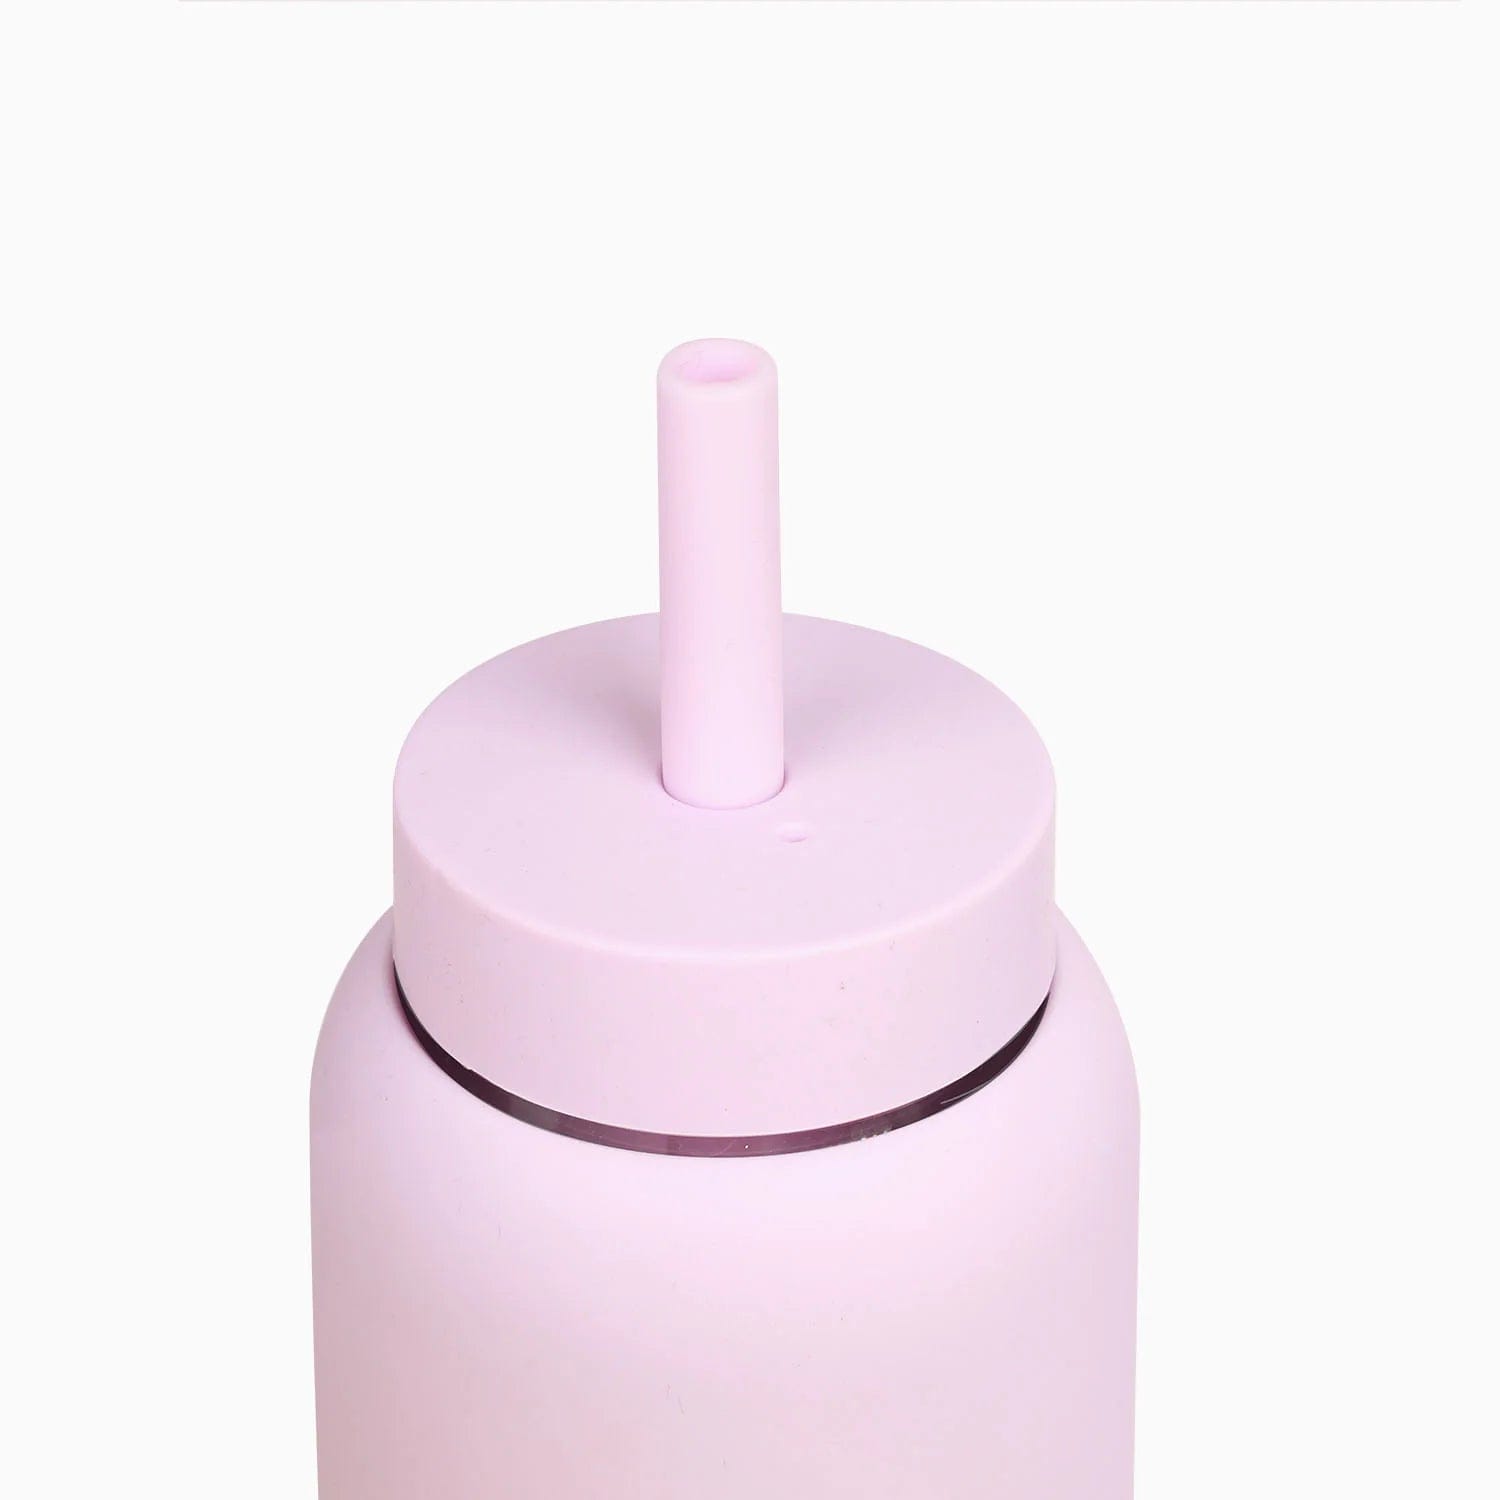 Bedside Water Carafe in Lilac